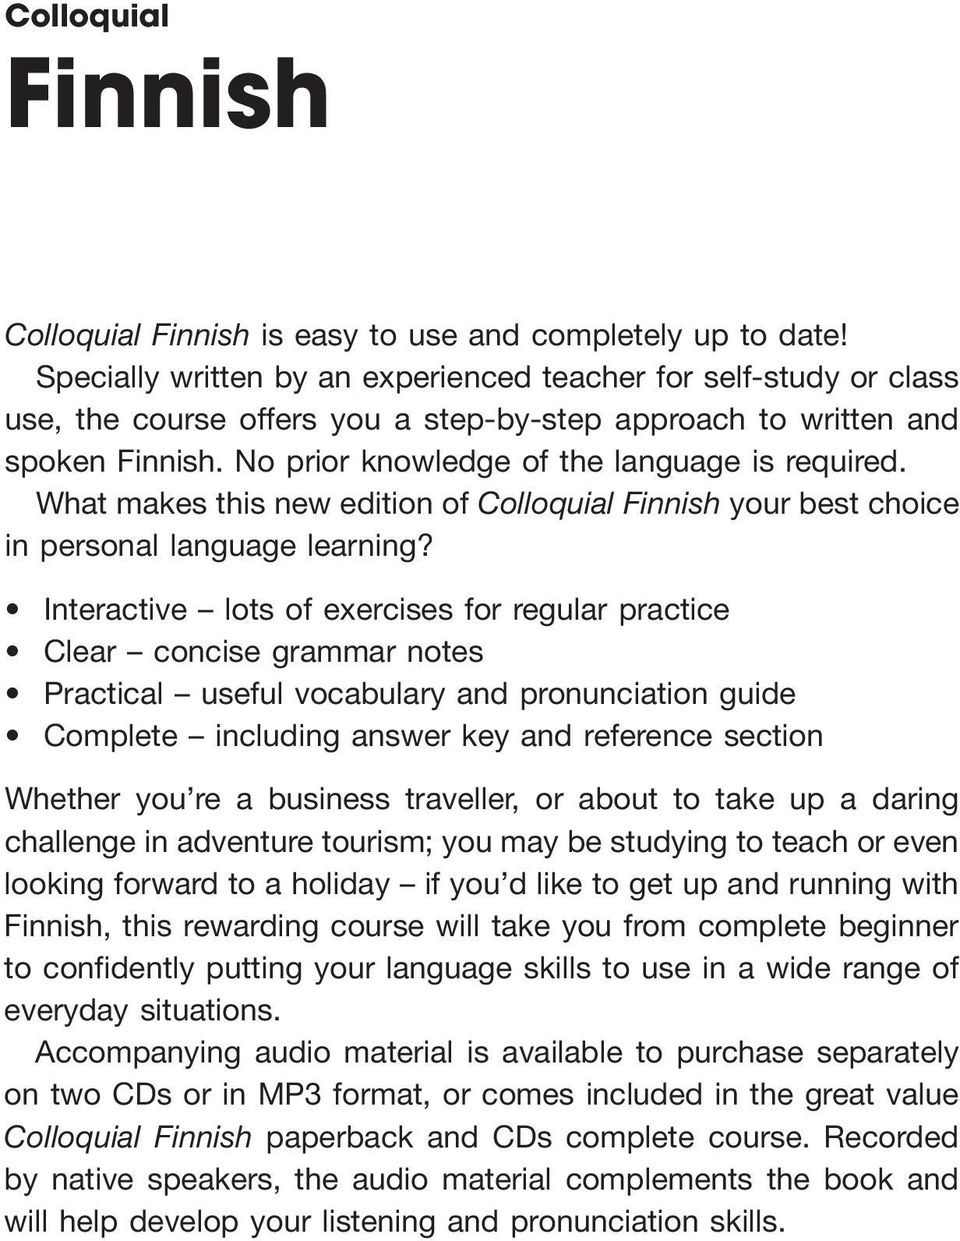 What makes this new edition of Colloquial Finnish your best choice in personal language learning?